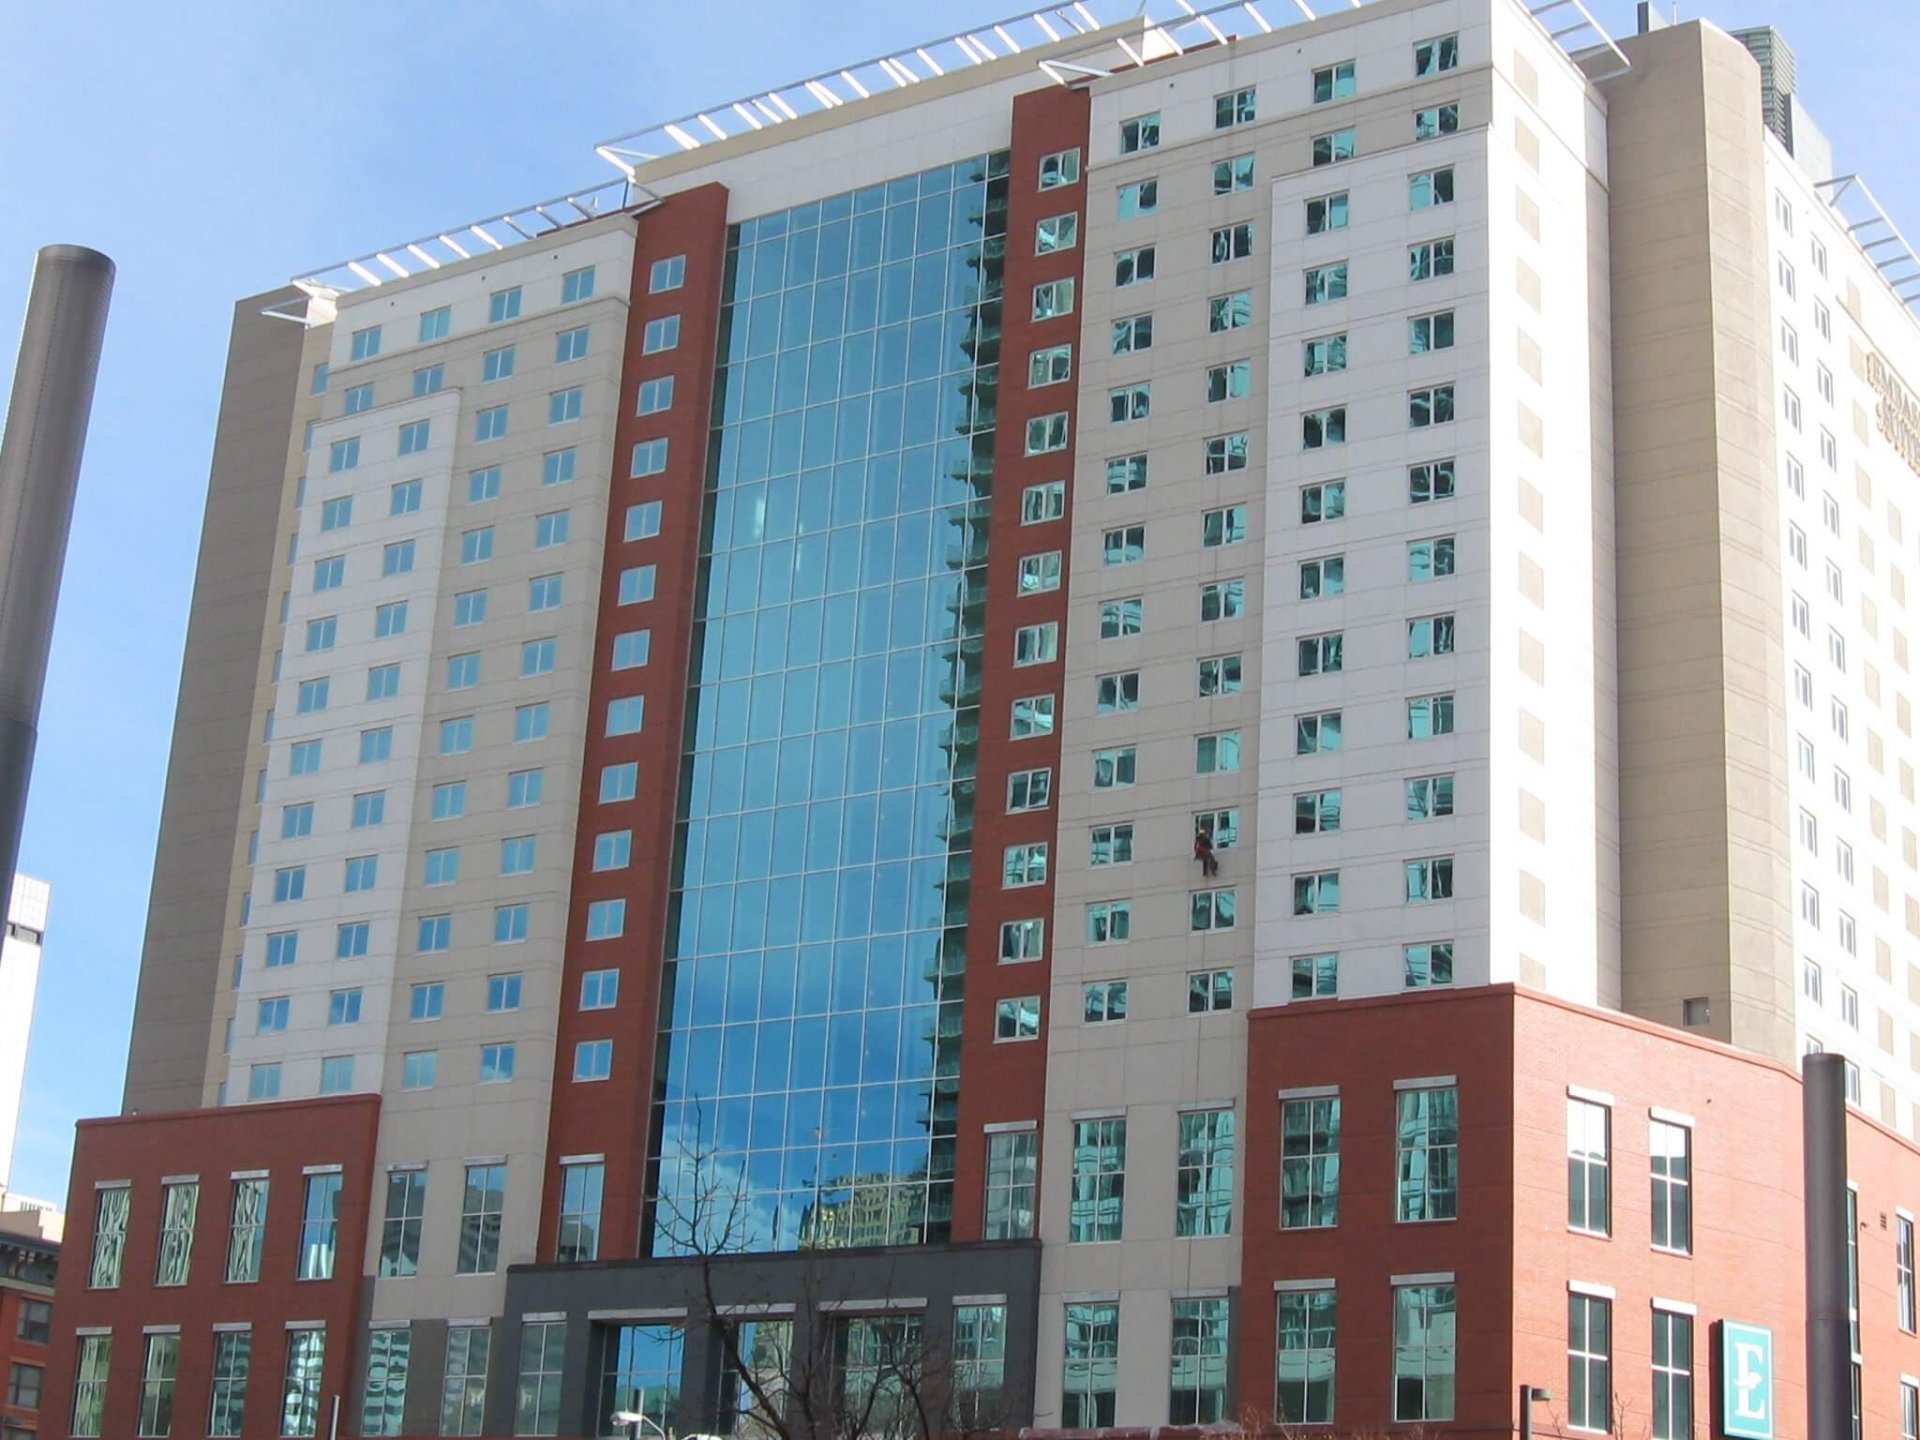 Bradleigh Applications, Inc. construction at Denver Embassy Suites